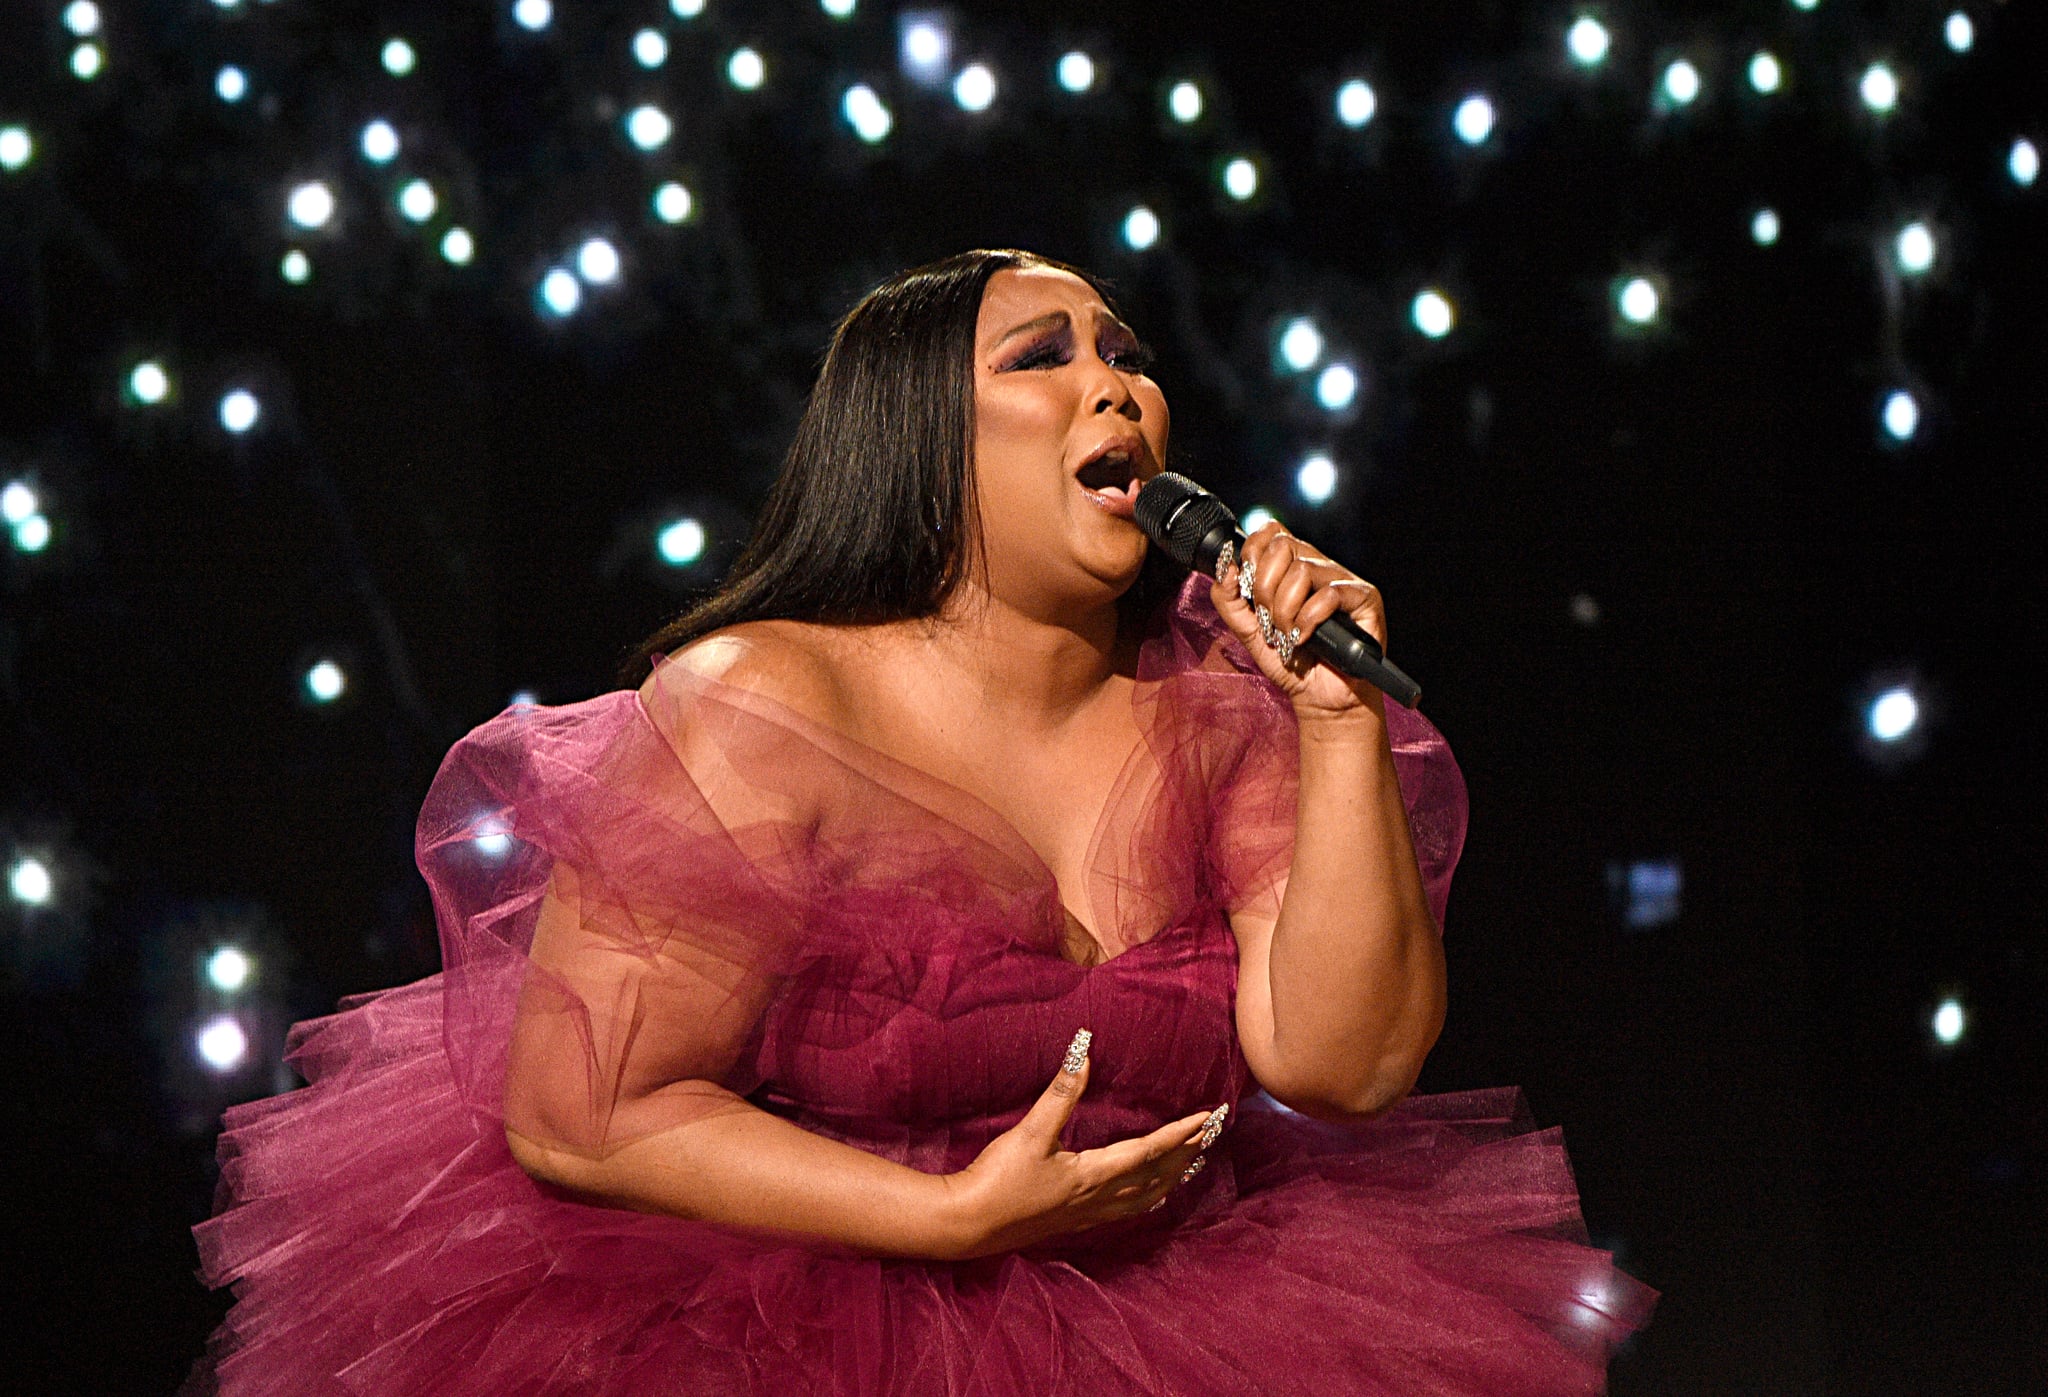 LOS ANGELES, CALIFORNIA - NOVEMBER 24: Lizzo performs onstage during the 2019 American Music Awards at Microsoft Theater on November 24, 2019 in Los Angeles, California. (Photo by Kevin Mazur/AMA2019/Getty Images for dcp)